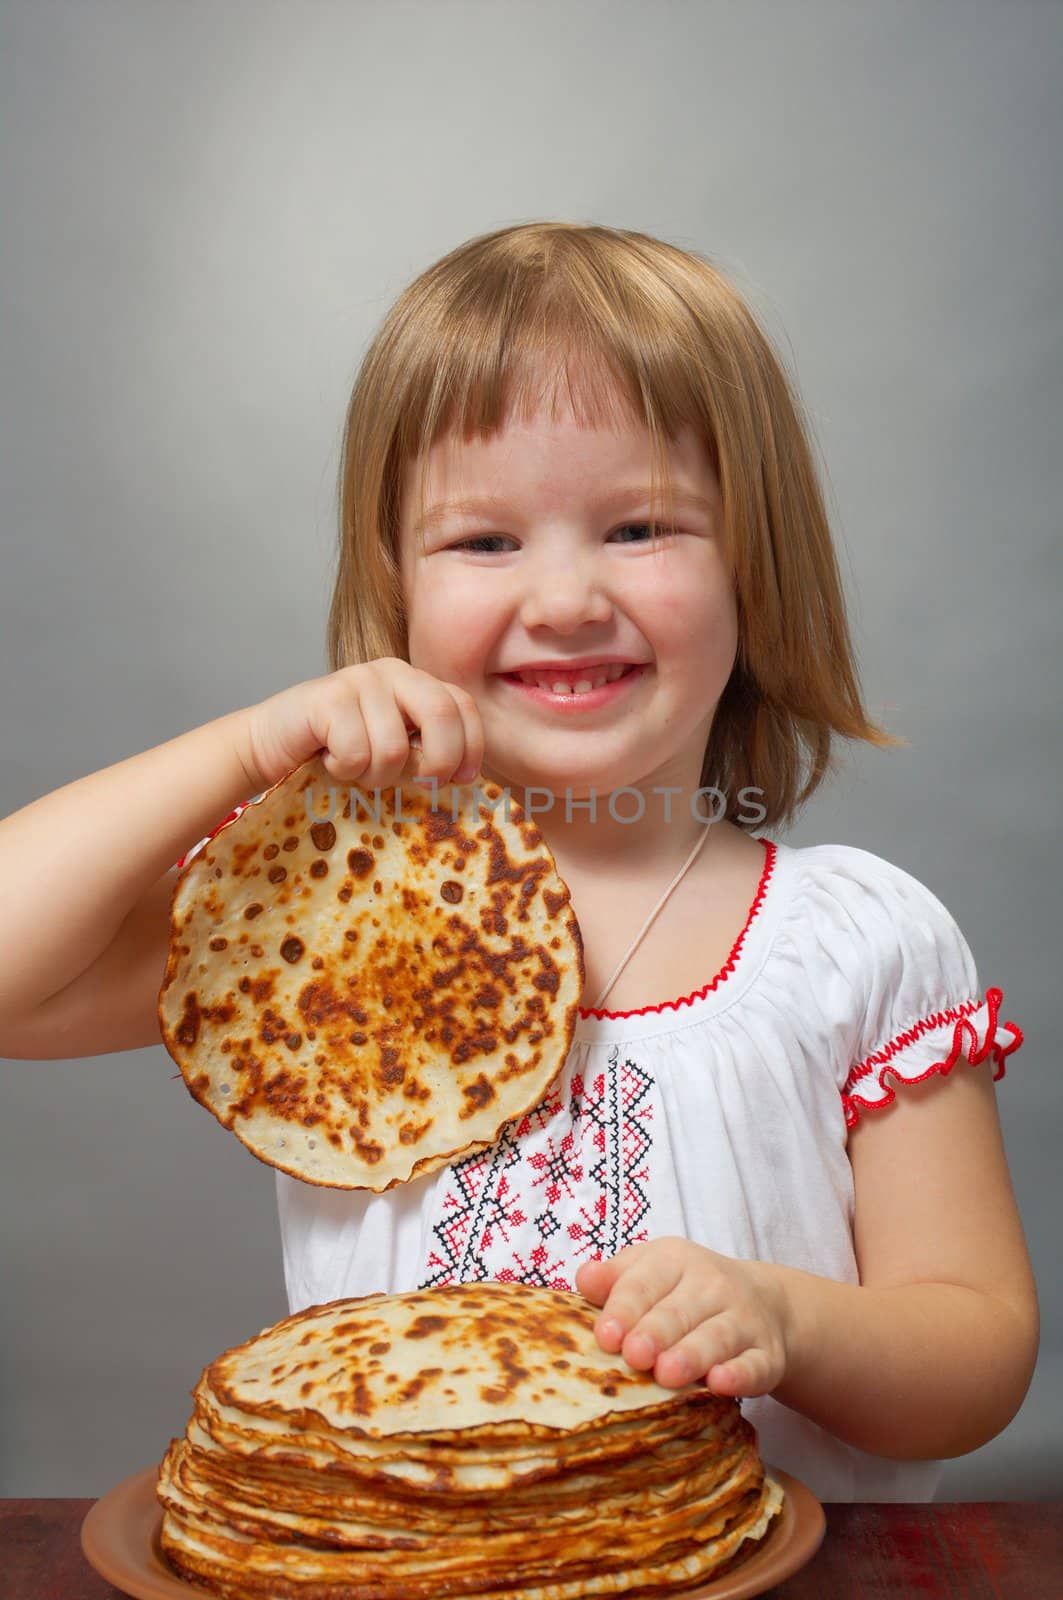 Russian little girl eats pancakes with red caviar.